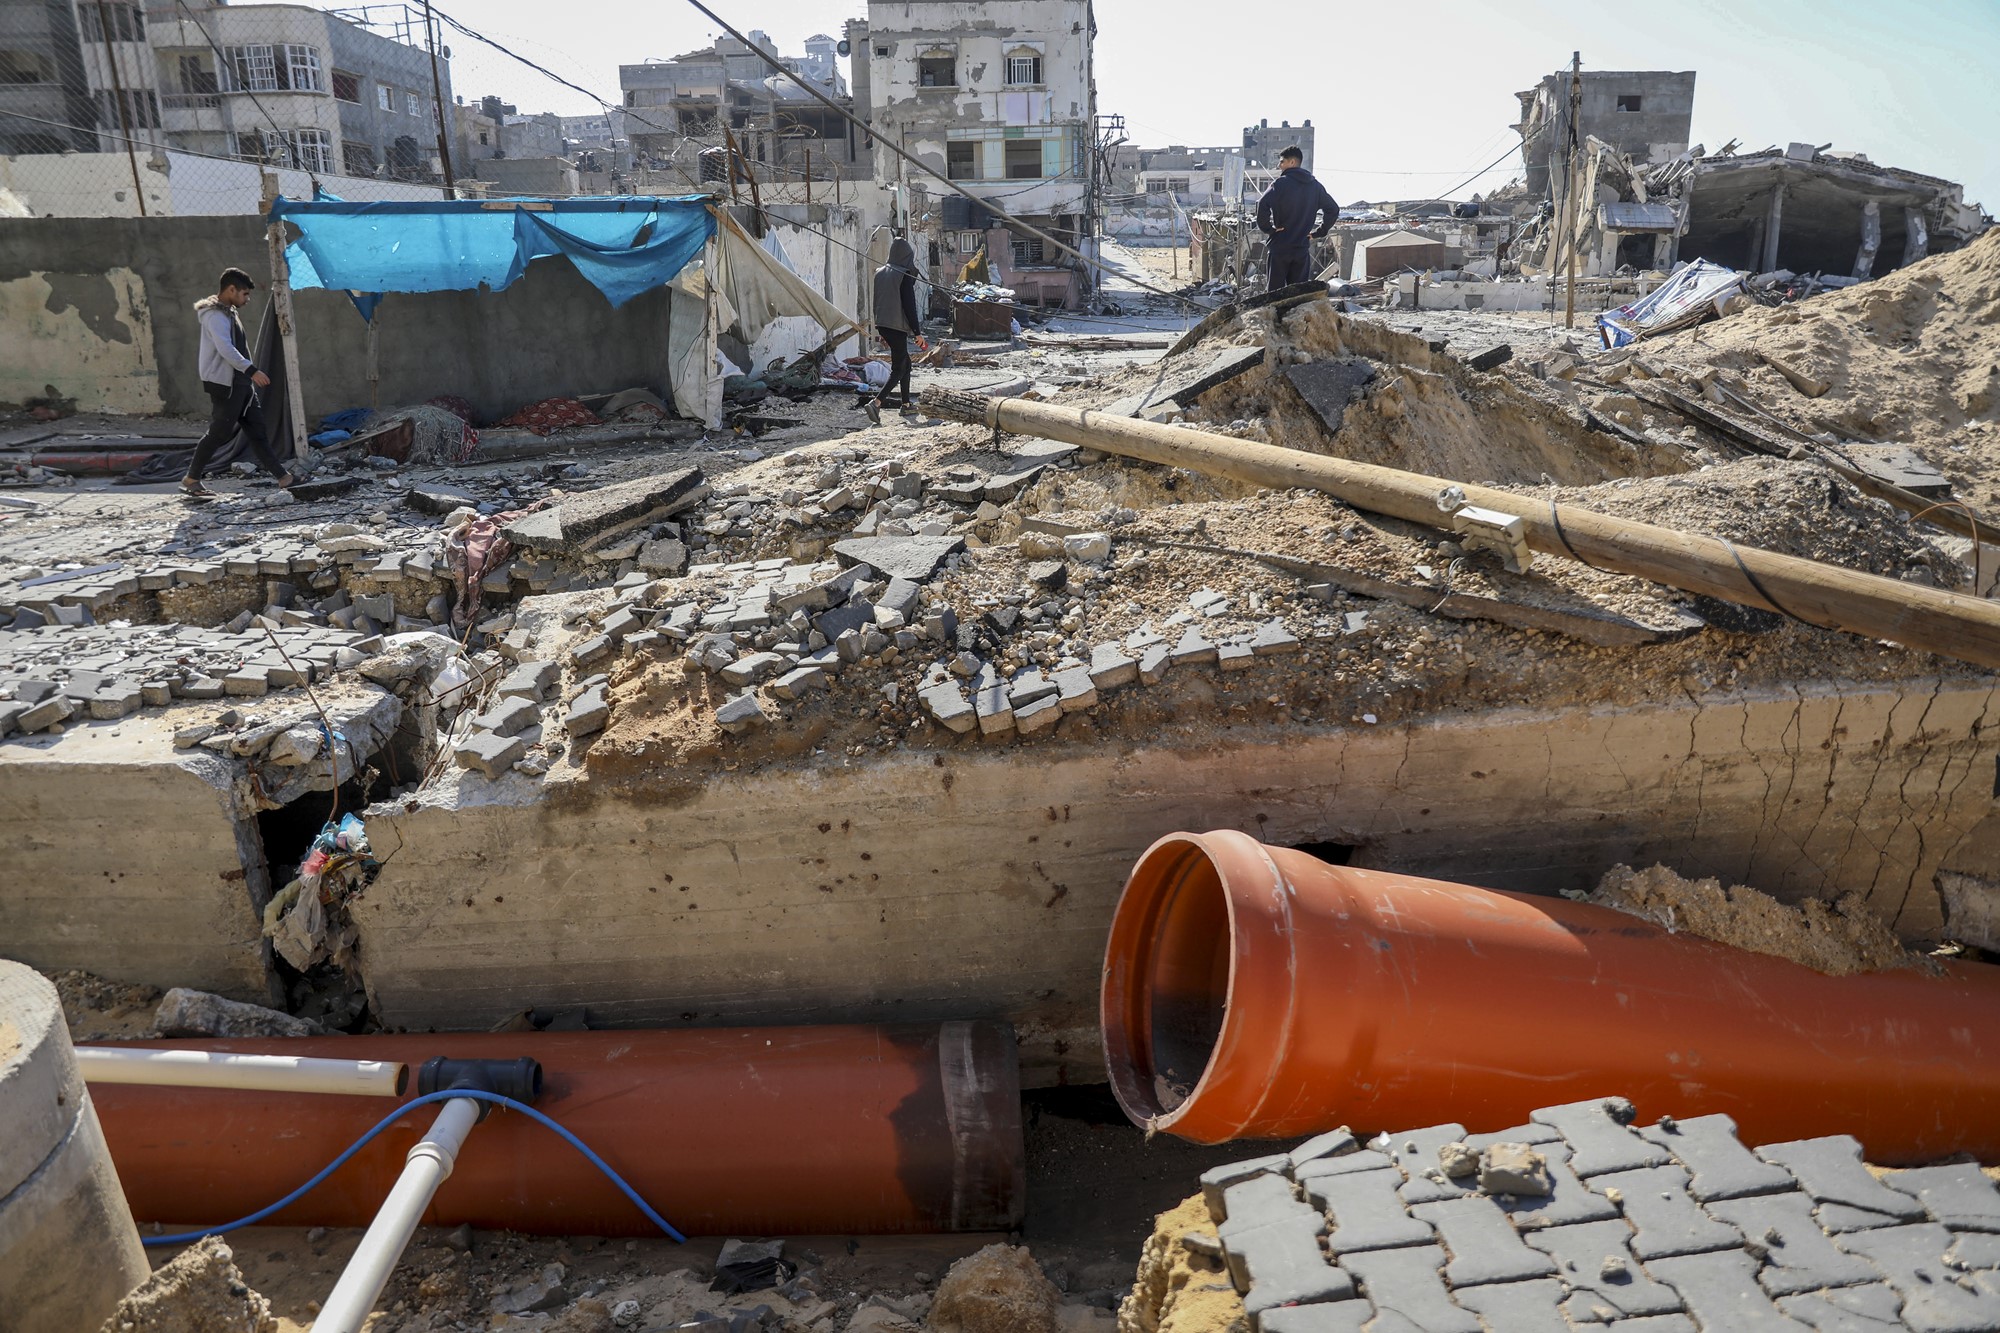 A medium shot of a broken large pipe, lying alongside rubble near people walking and badly damaged buildings in the background